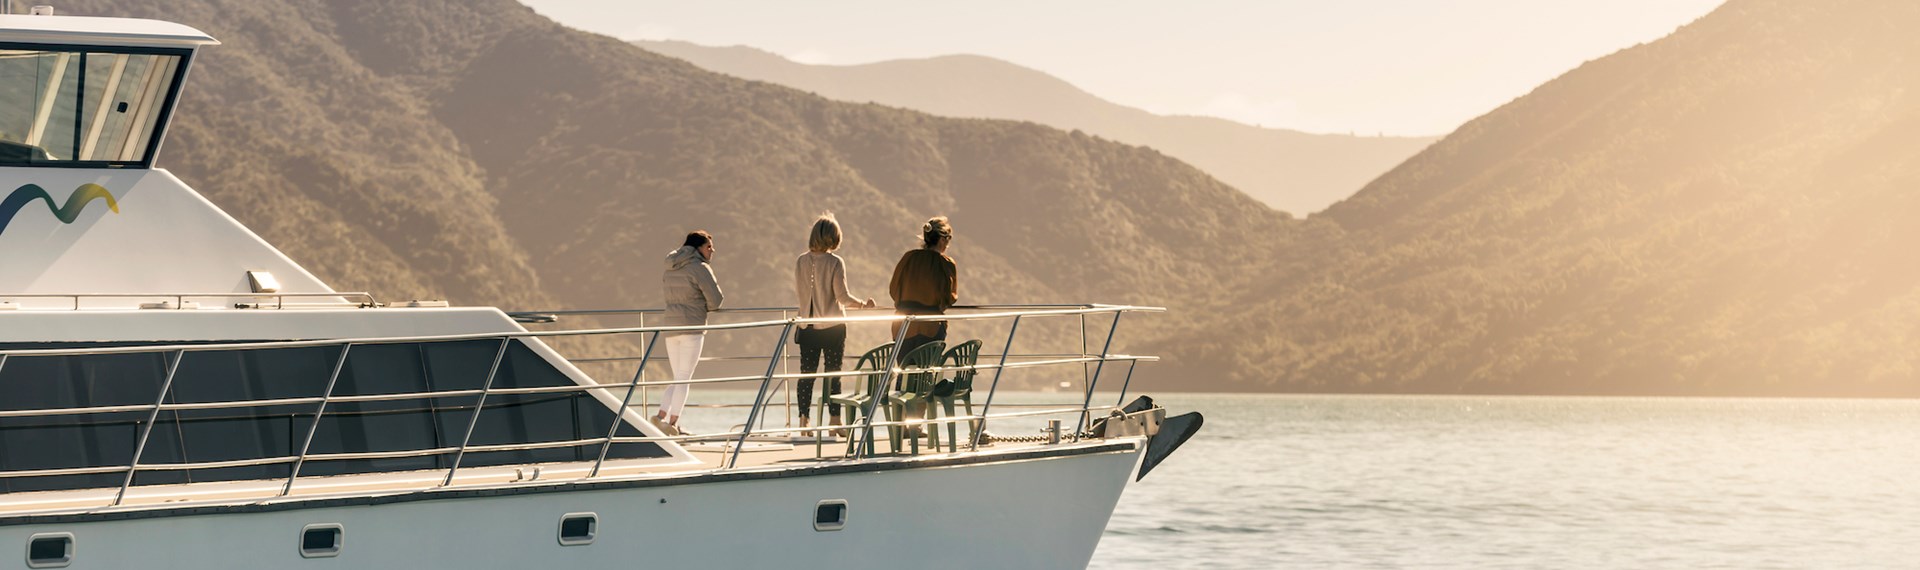 Cruising the Marlborough Sounds at the top of New Zealand's South Island, people view the sun set over the bush clad hills from the bow of MV Odyssea